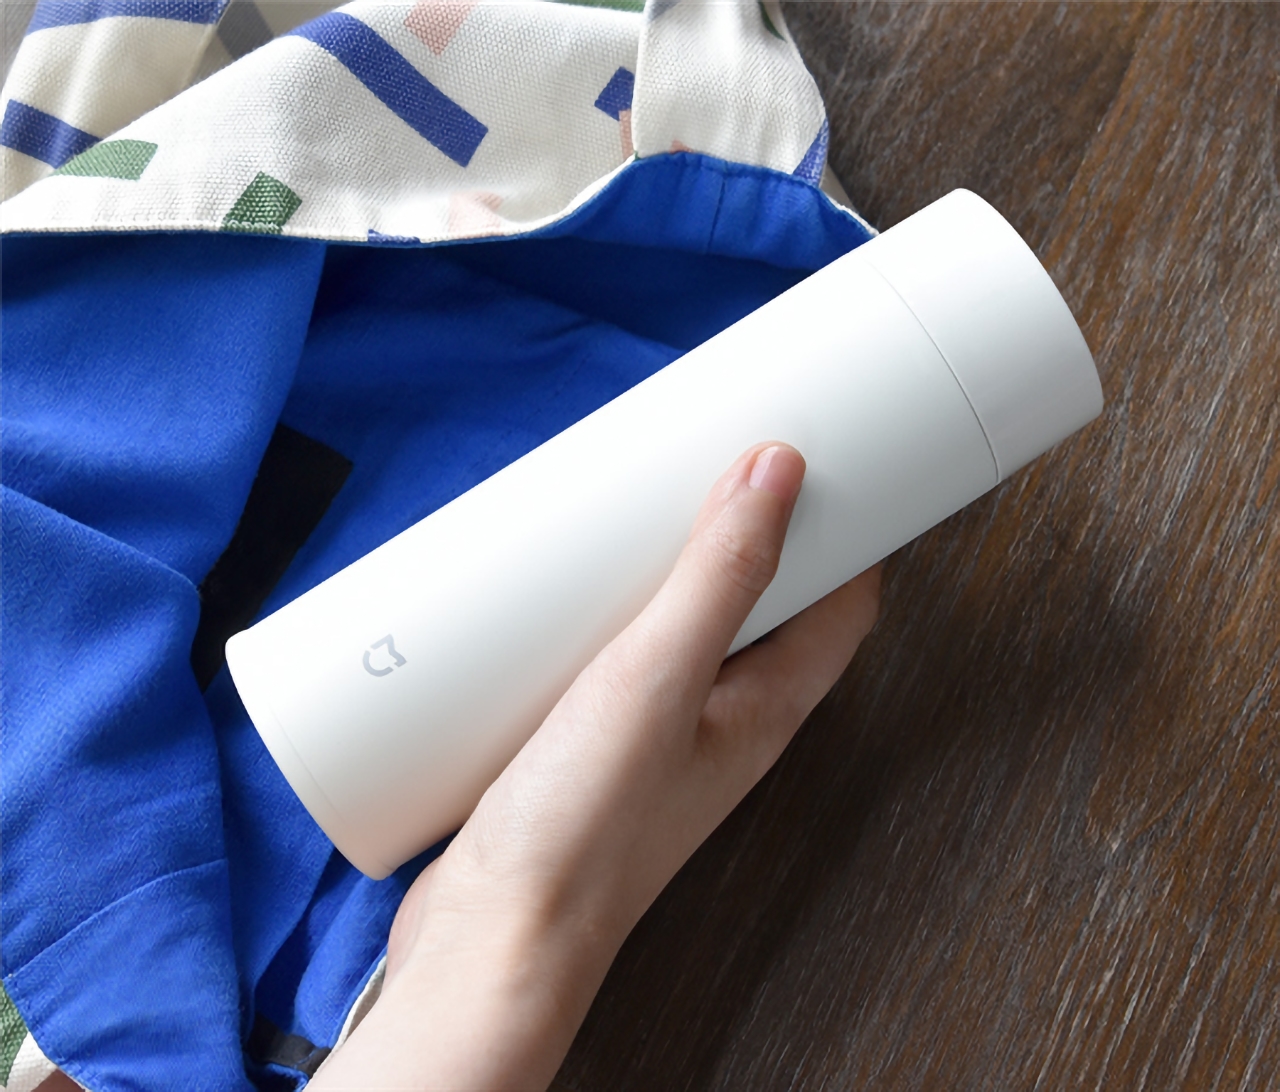 Xiaomi introduced the MiJia Mini Insulation Cup for $ 8